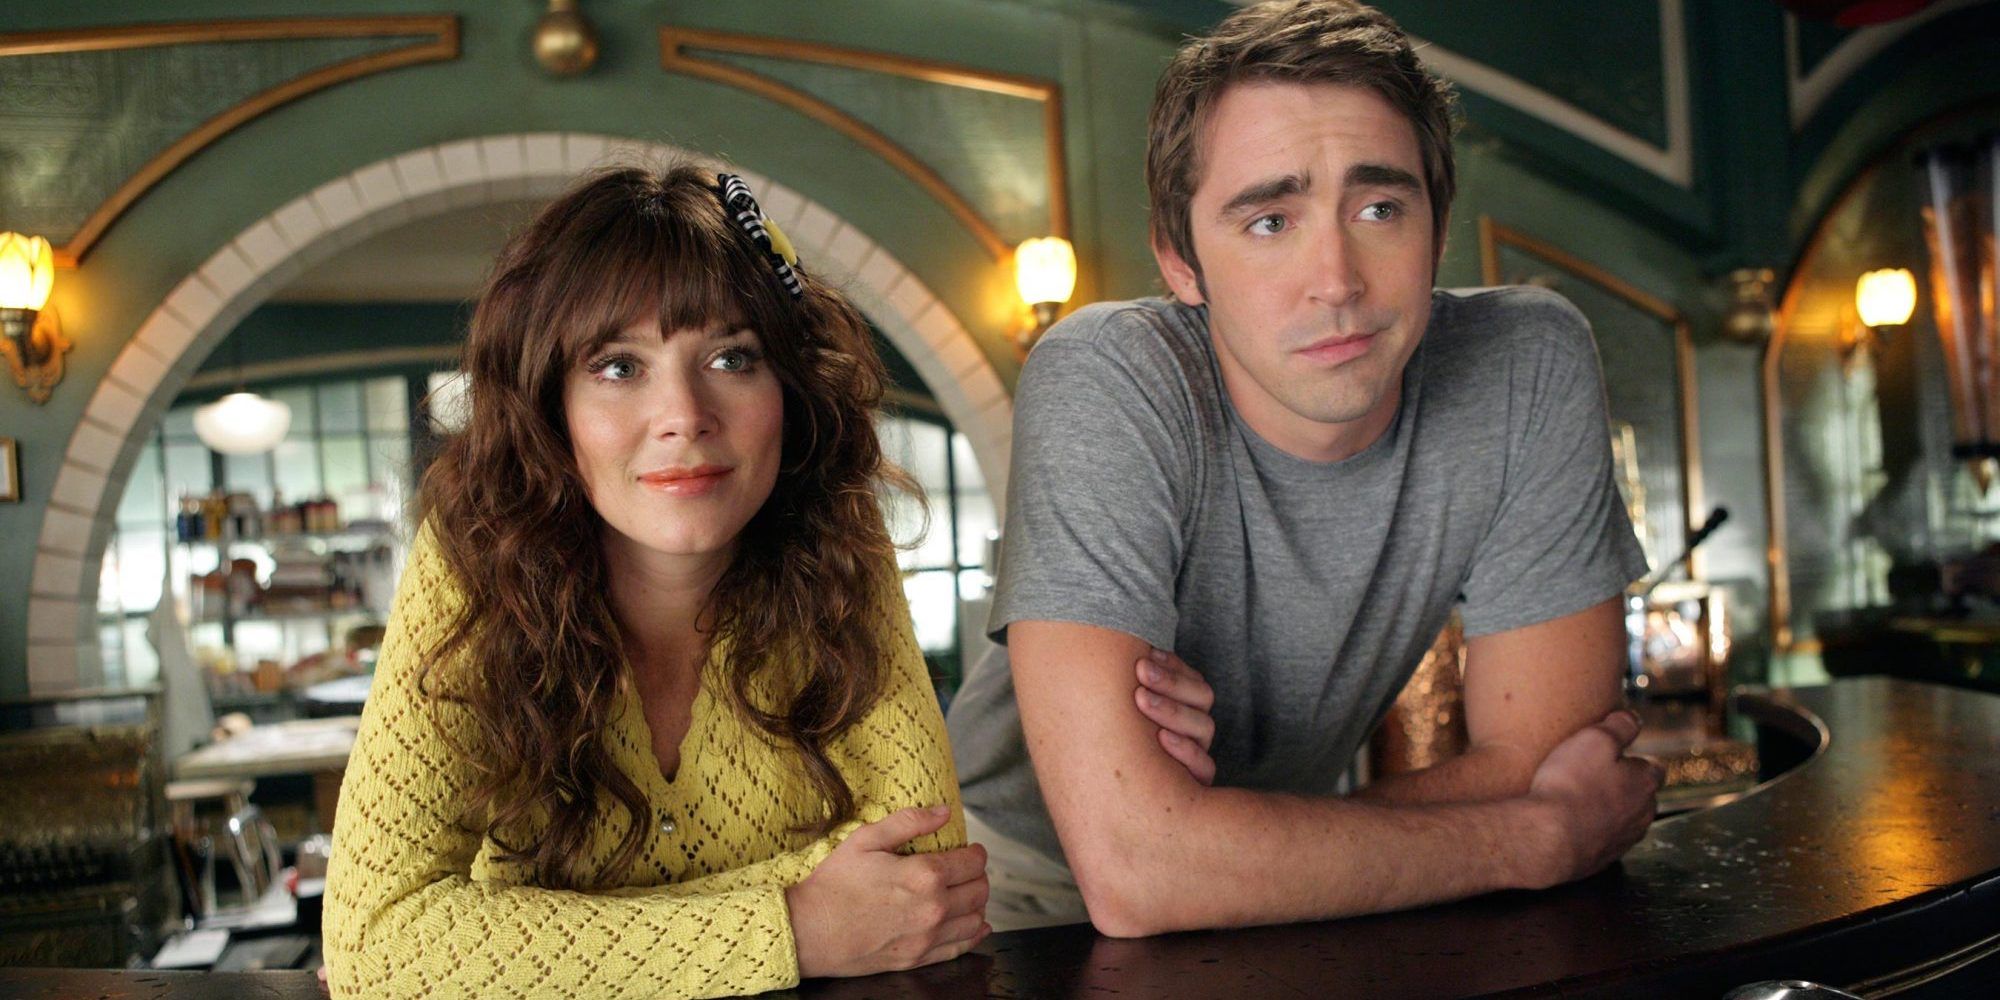 A man and woman lean on a counter while looking on from Pushing Daisies 